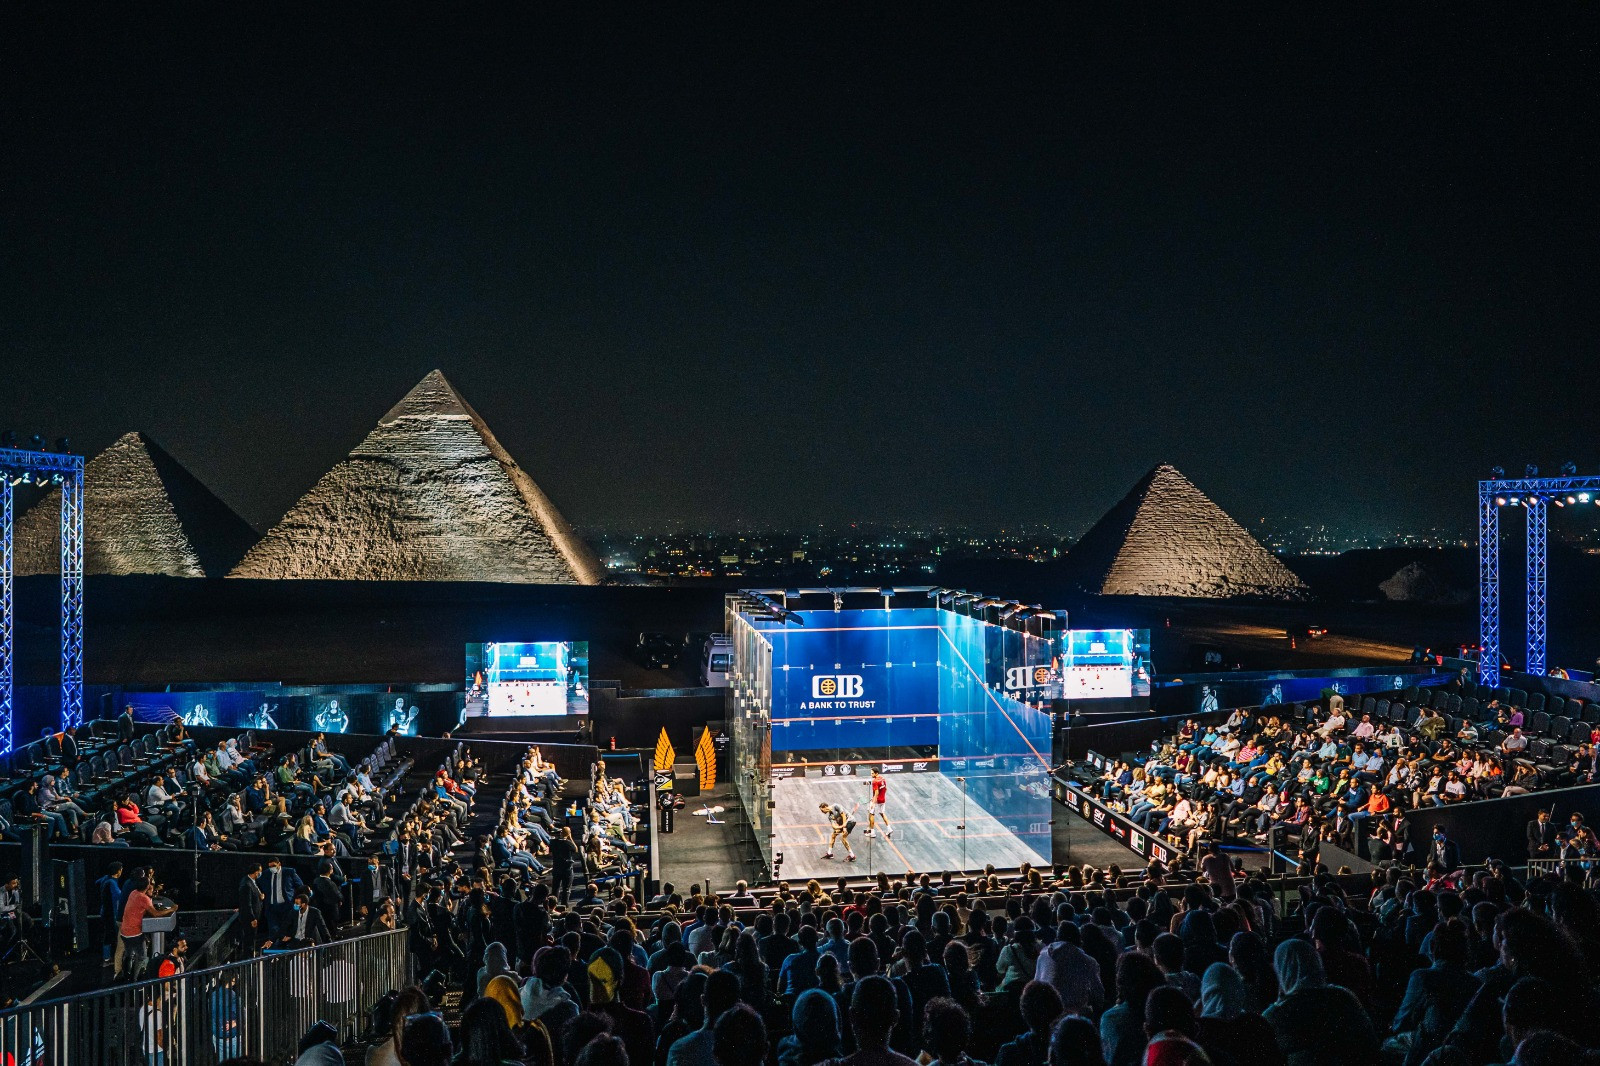 Action at the CIB Egyptian Open has been taking place on the Glass Court in front of the Great Pyramids of Giza ©PSA World Tour